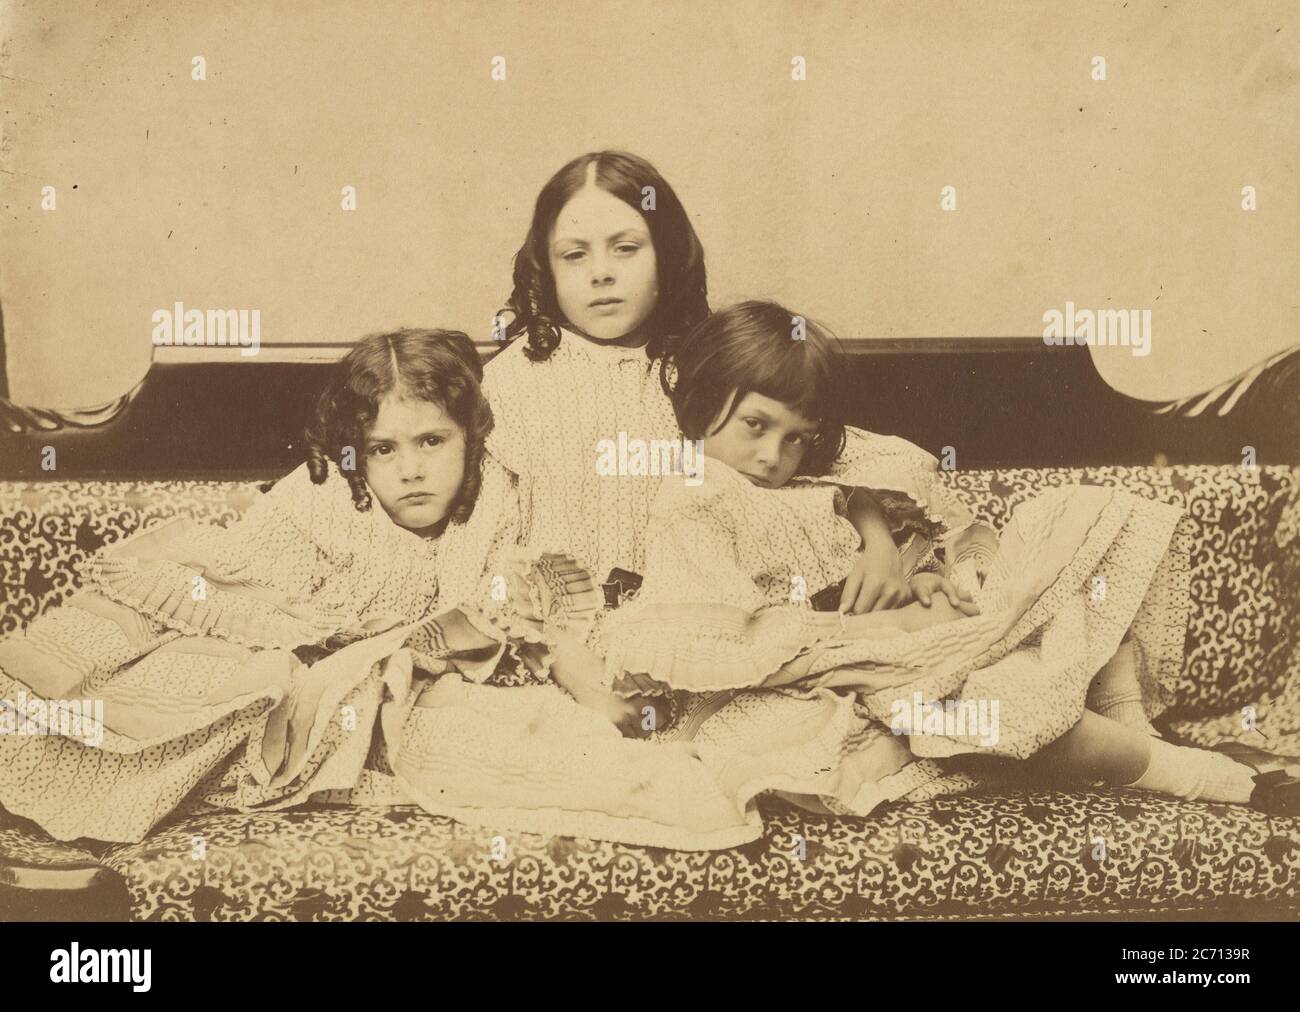 Edith, Ina and Alice Liddell on a Sofa, Summer 1858. Stock Photo